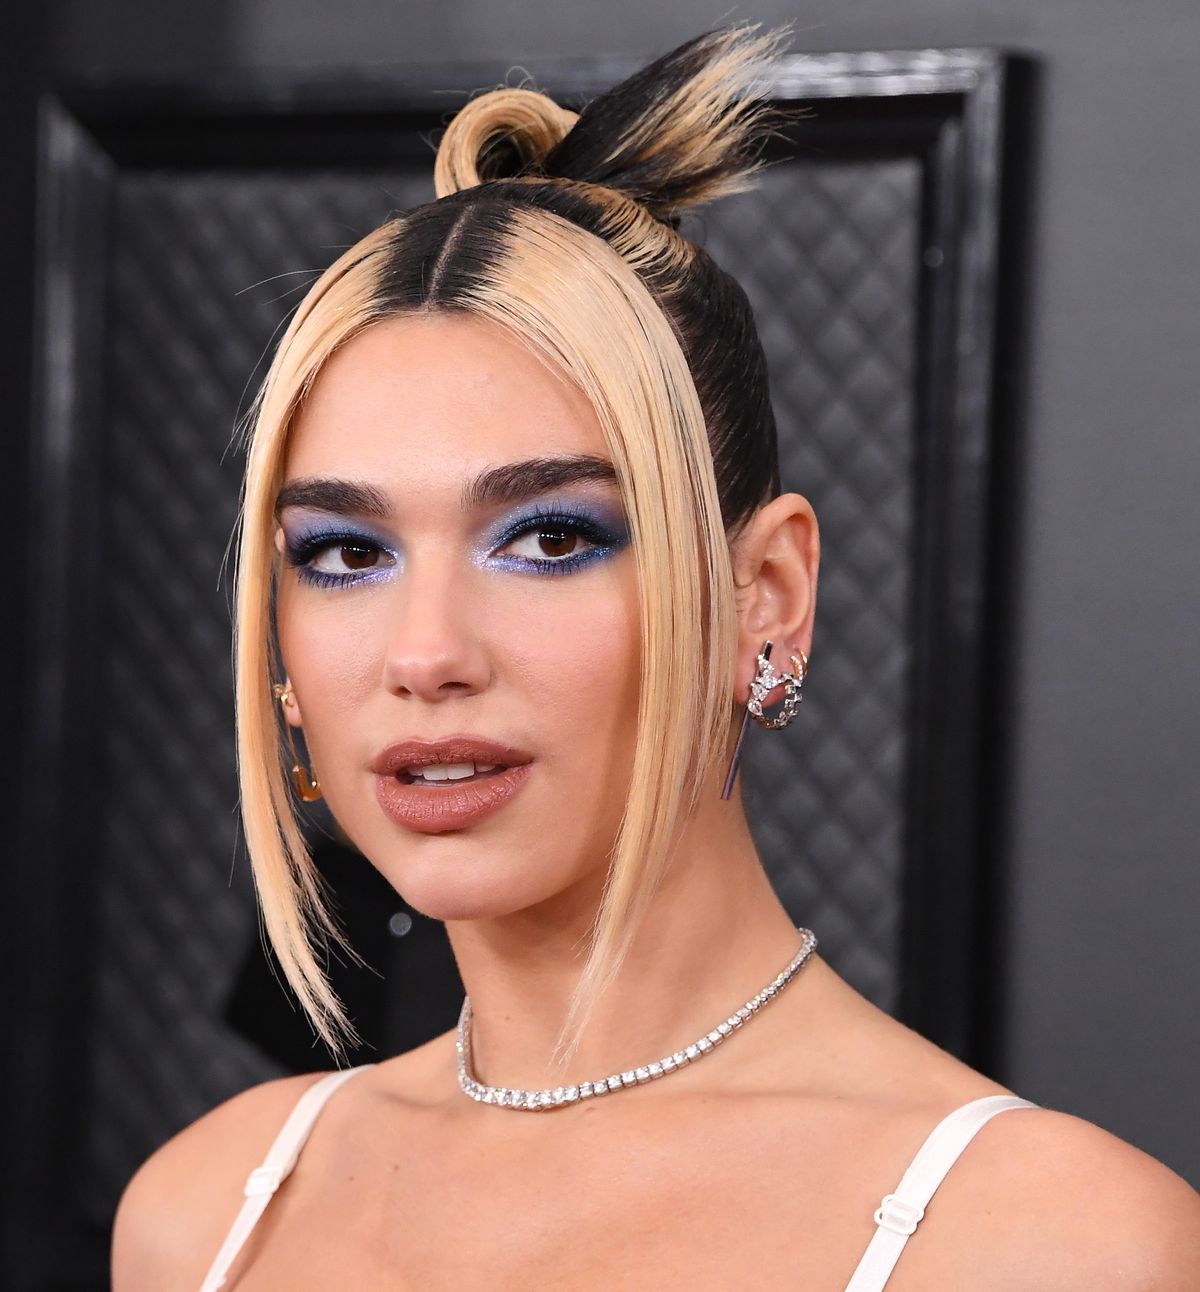 Dua Lipa at the 62nd Annual GRAMMY Awards at Staples Center on January 26, 2020 | Photo: Getty Images